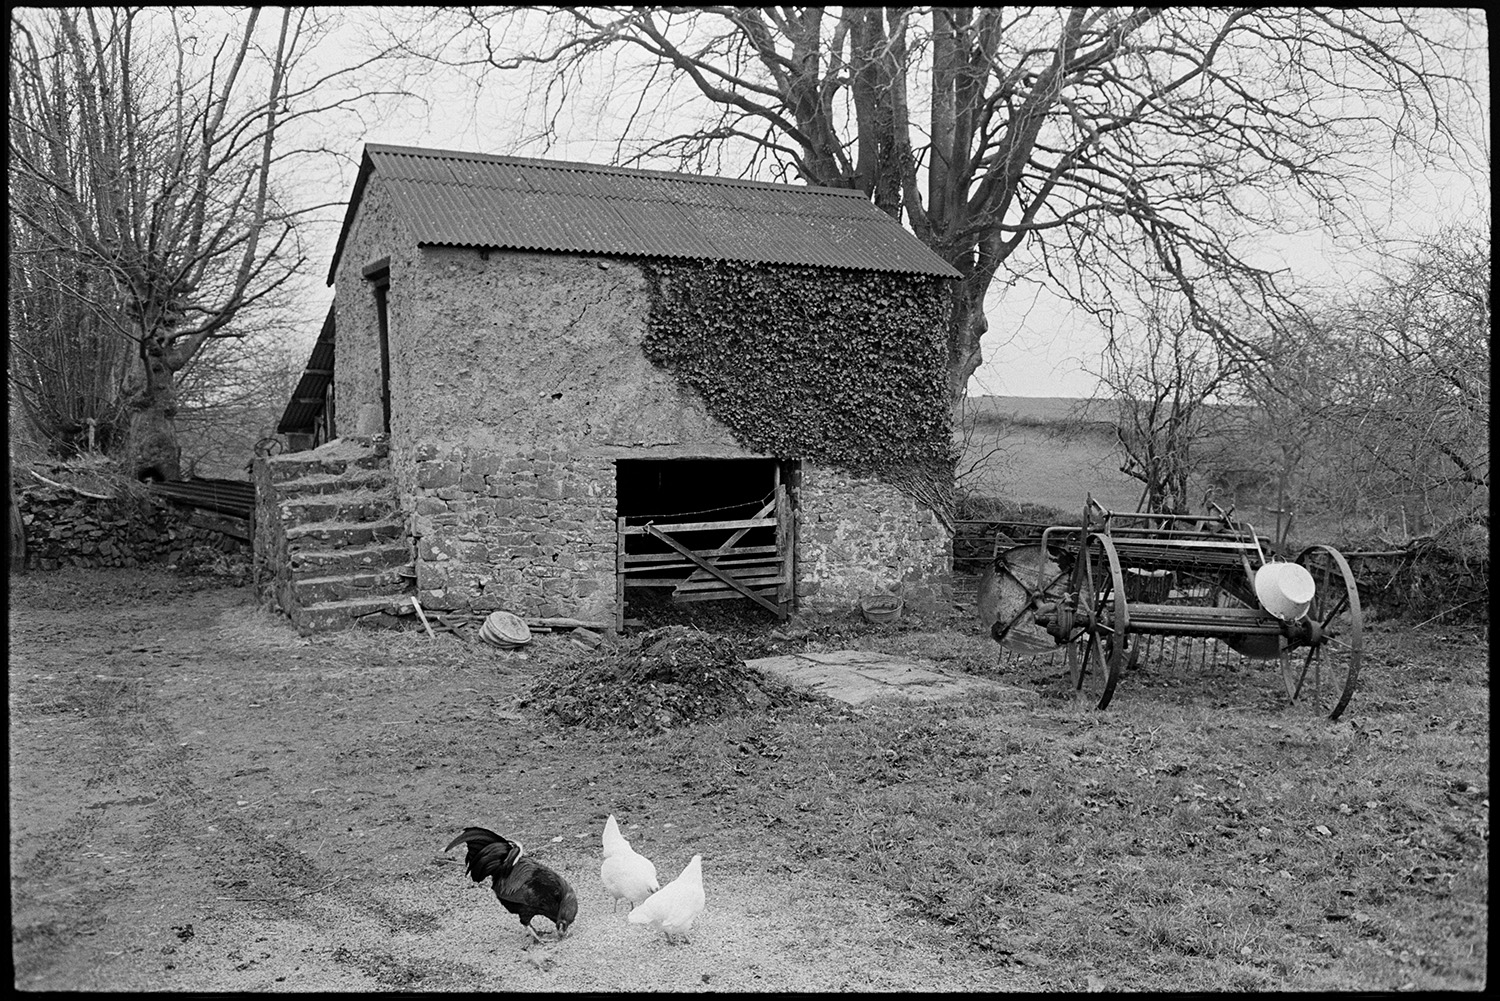 Chickens and a cockerel in the famryard at Colehouse, Riddlecombe. A piece of farm machinery is parked next to a stone and cob granary barn with steps in the background. The entrance to the lower half of the granary has a field gate and ivy is growing up the wall.]